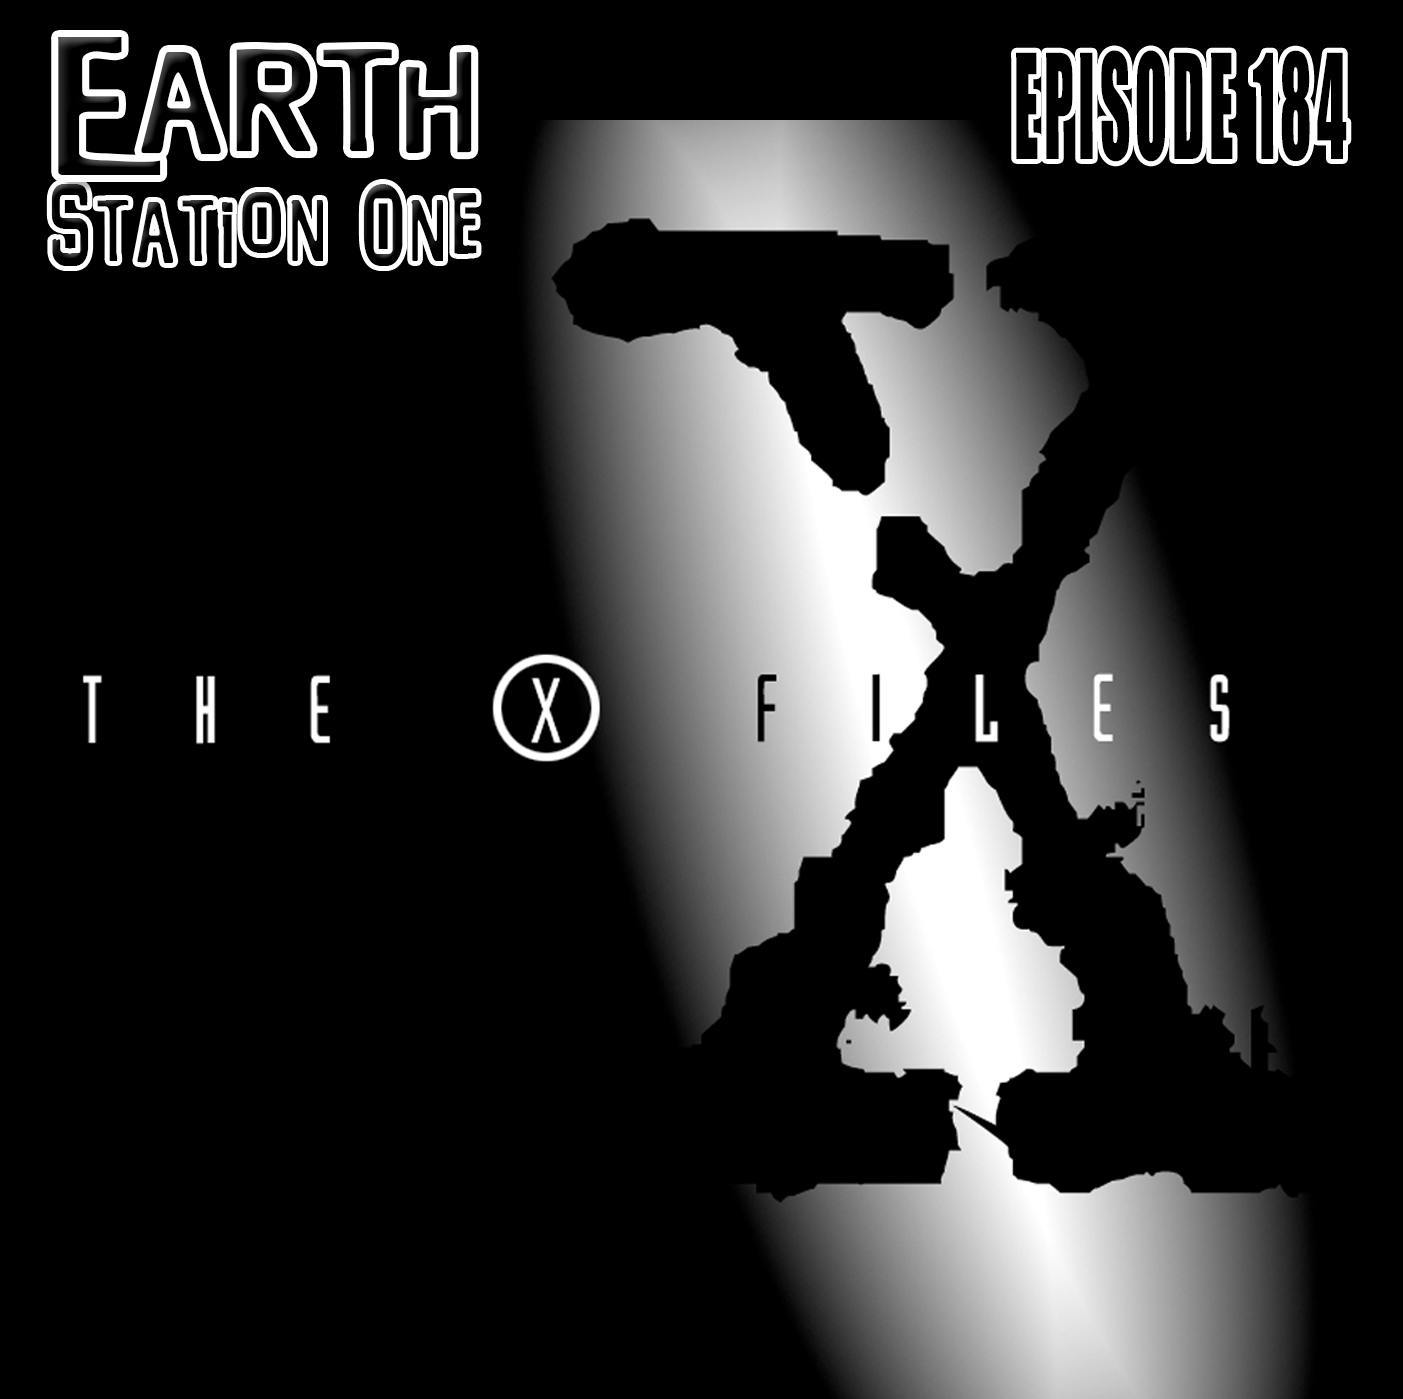 Earth Station One Ep 184